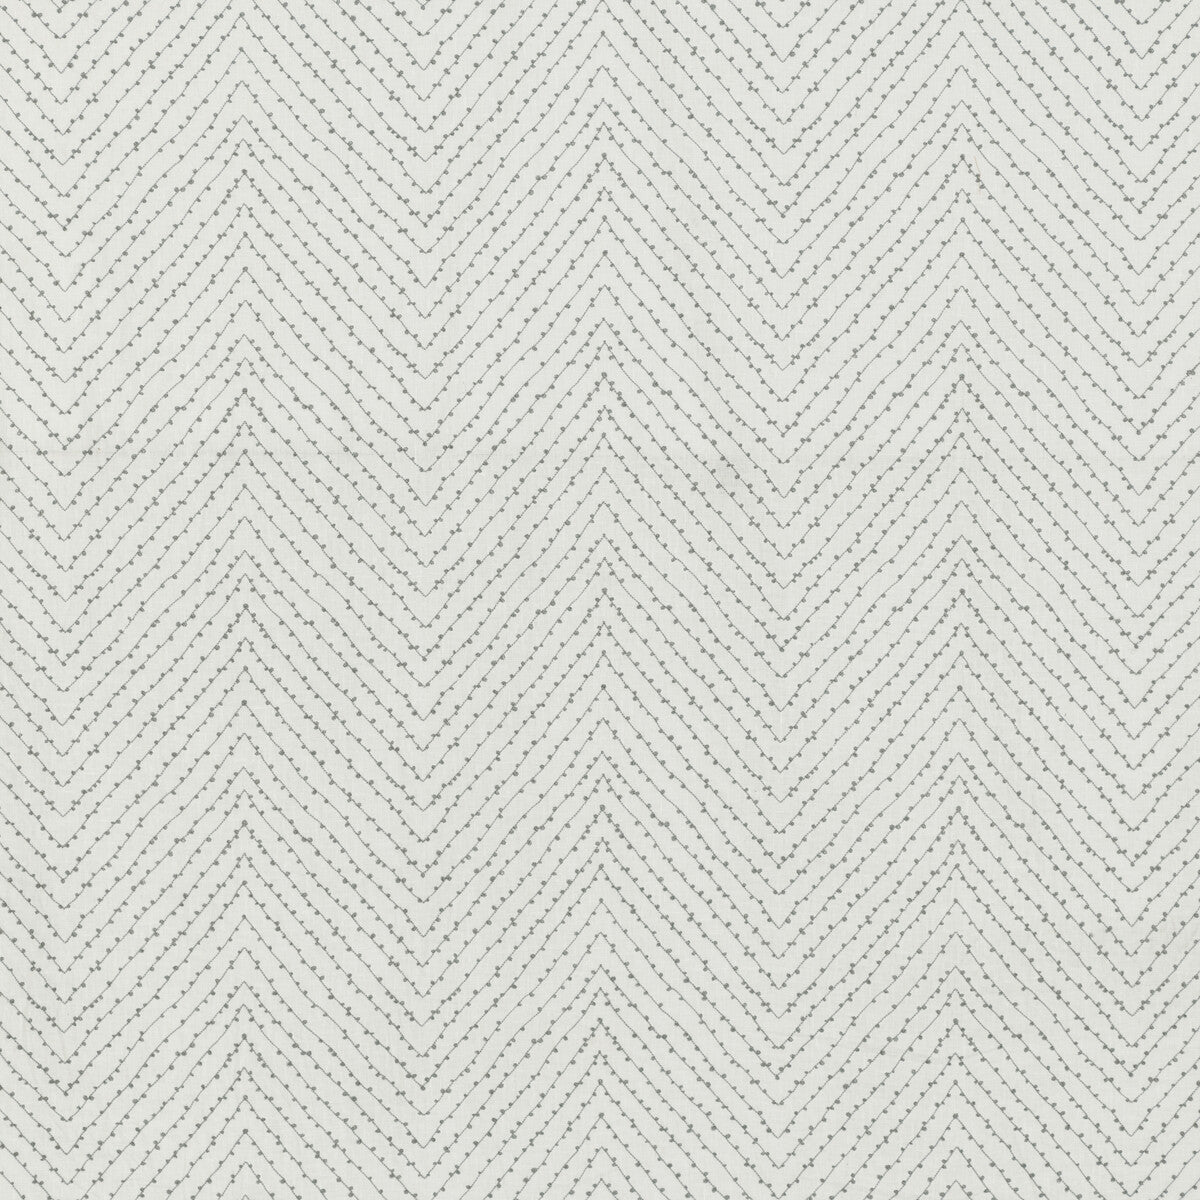 Stringknot fabric in fog color - pattern 4851.11.0 - by Kravet Basics in the Monterey collection